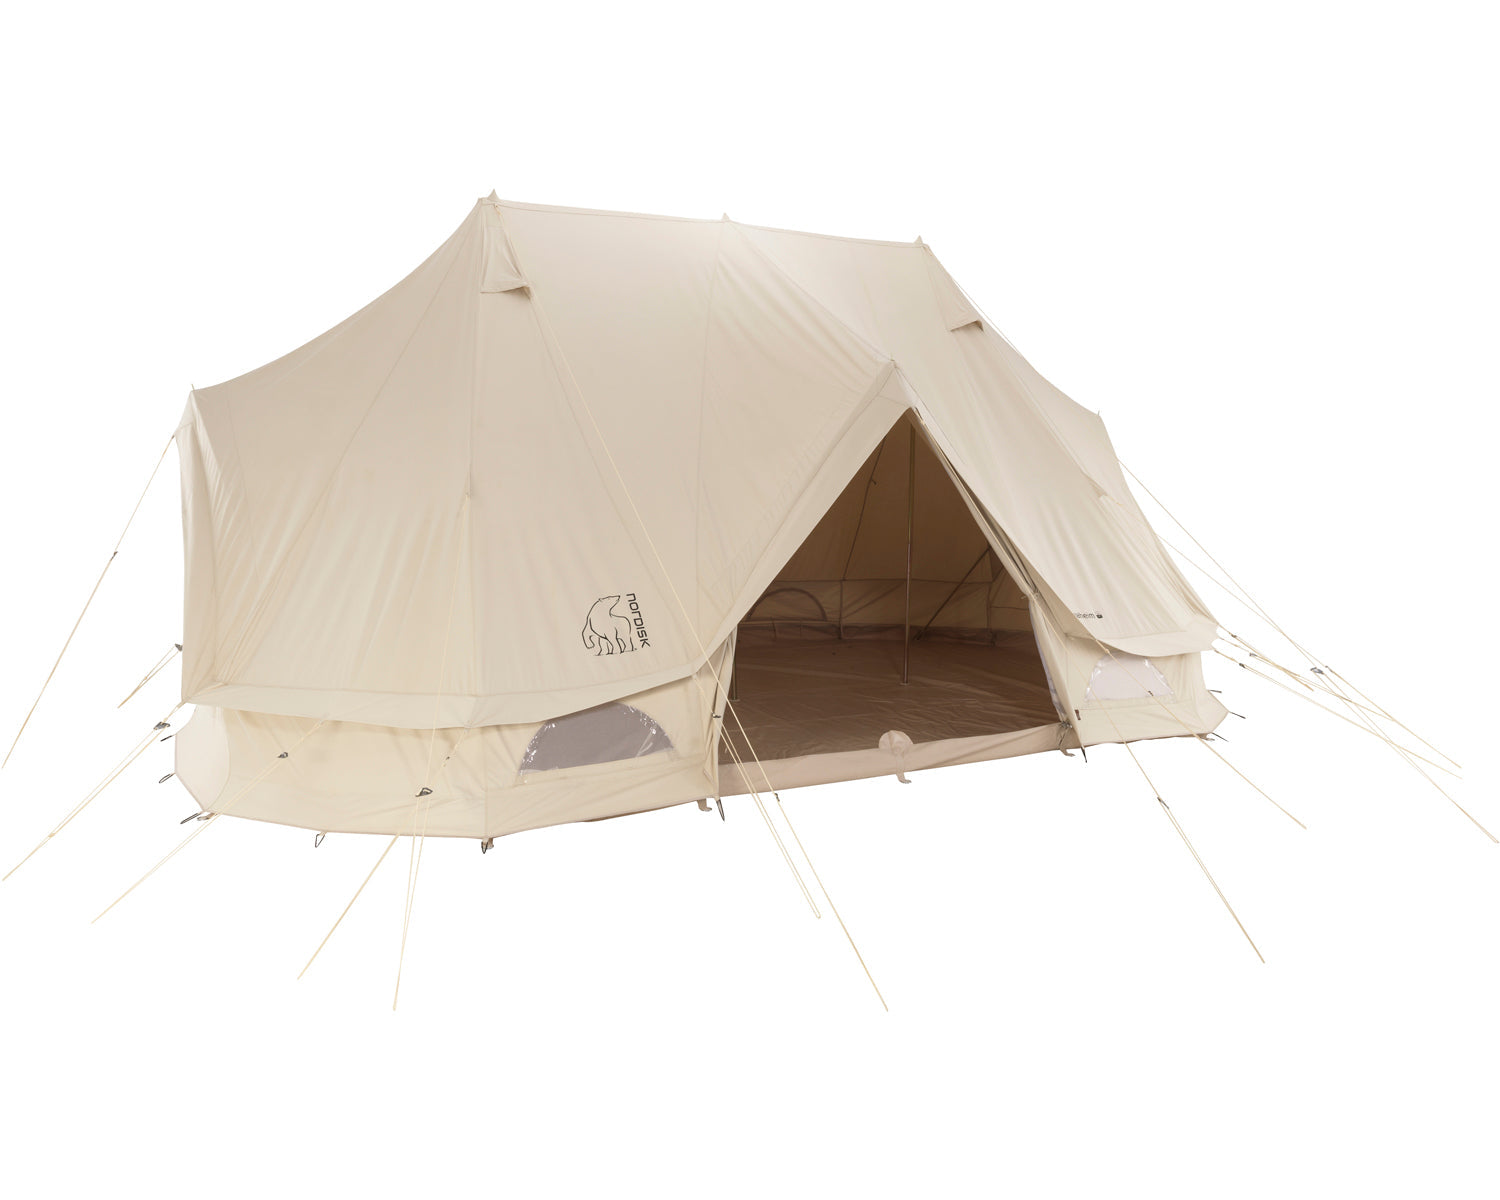 Vanaheim 24 m² glamping tent - 16 person - Natural